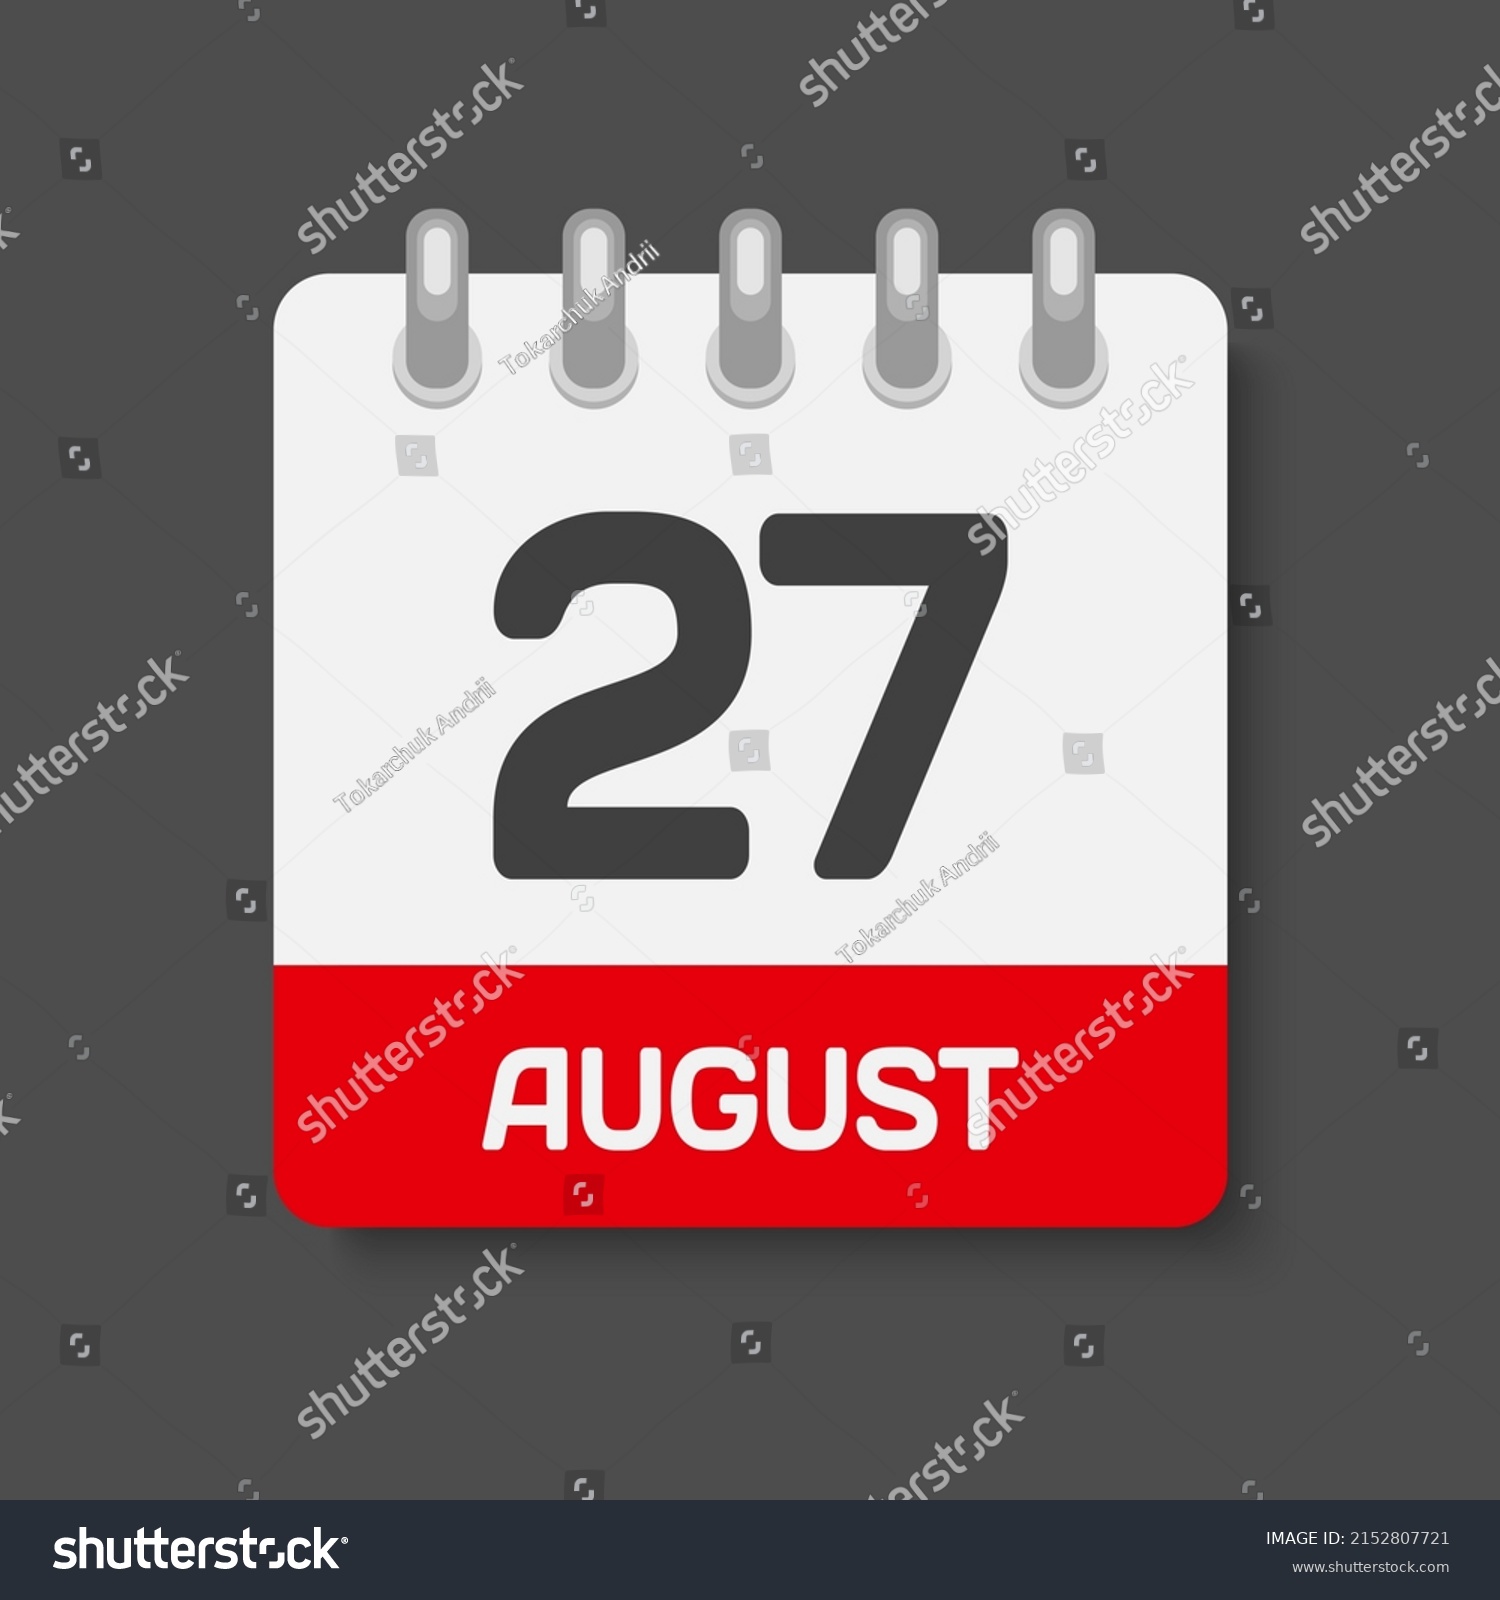 SVG of Icon page calendar day - 27 August. Days of the month, vector illustration flat style. 27th date day of week Sunday, Monday, Tuesday, Wednesday, Thursday, Friday, Saturday. Summer holidays in August svg